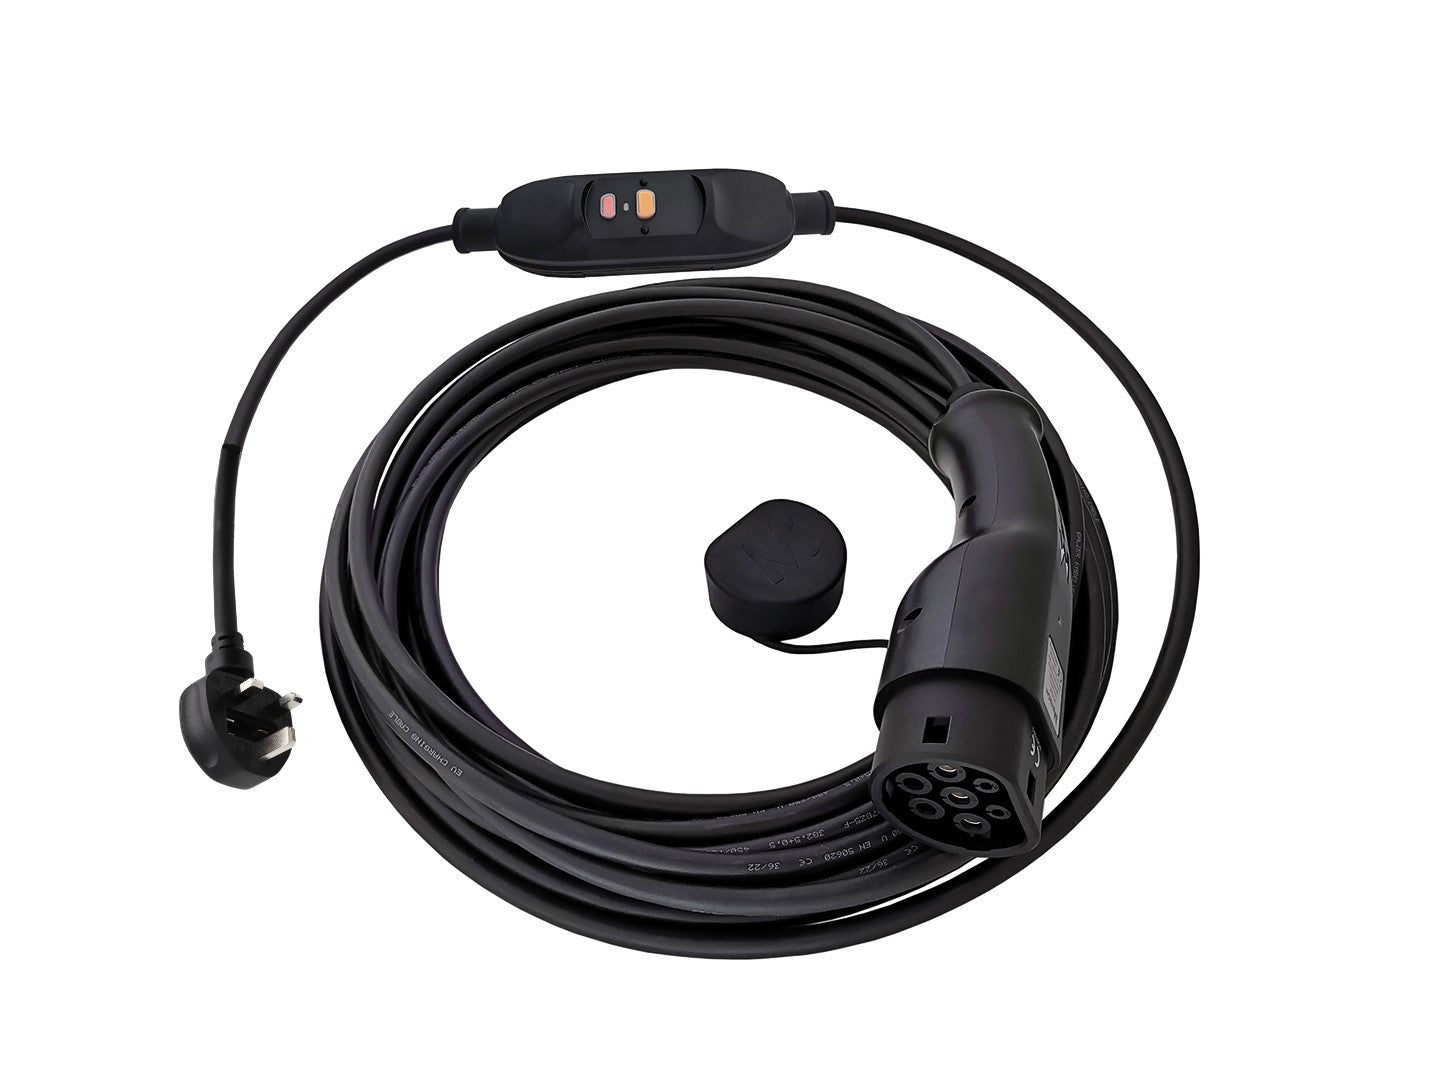 Ideal Wholesale charging cable type 2 renault zoe For Your